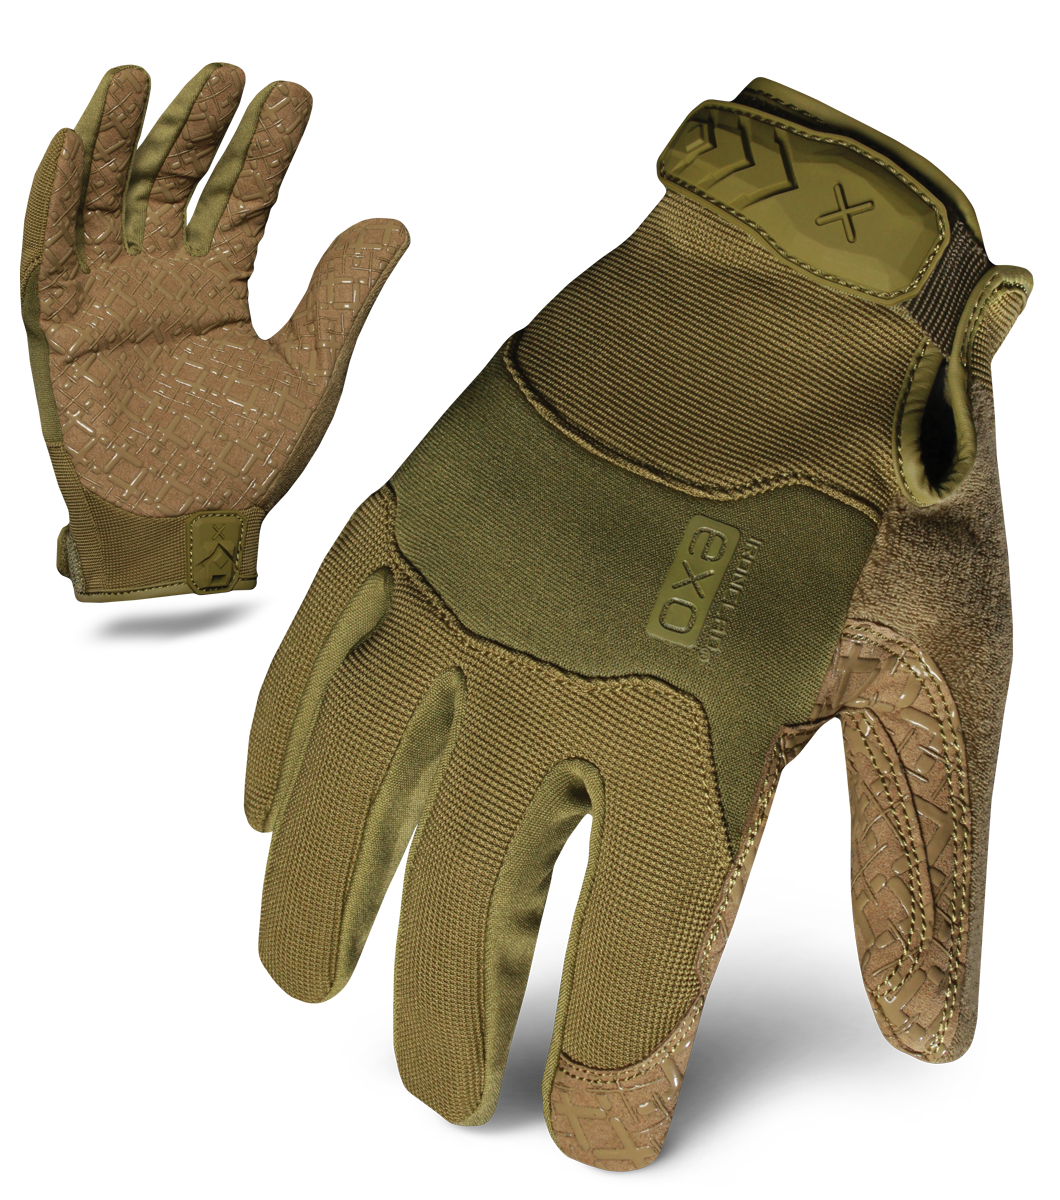 Ironclad EXOT-P Tactical Pro Gloves - OD Green